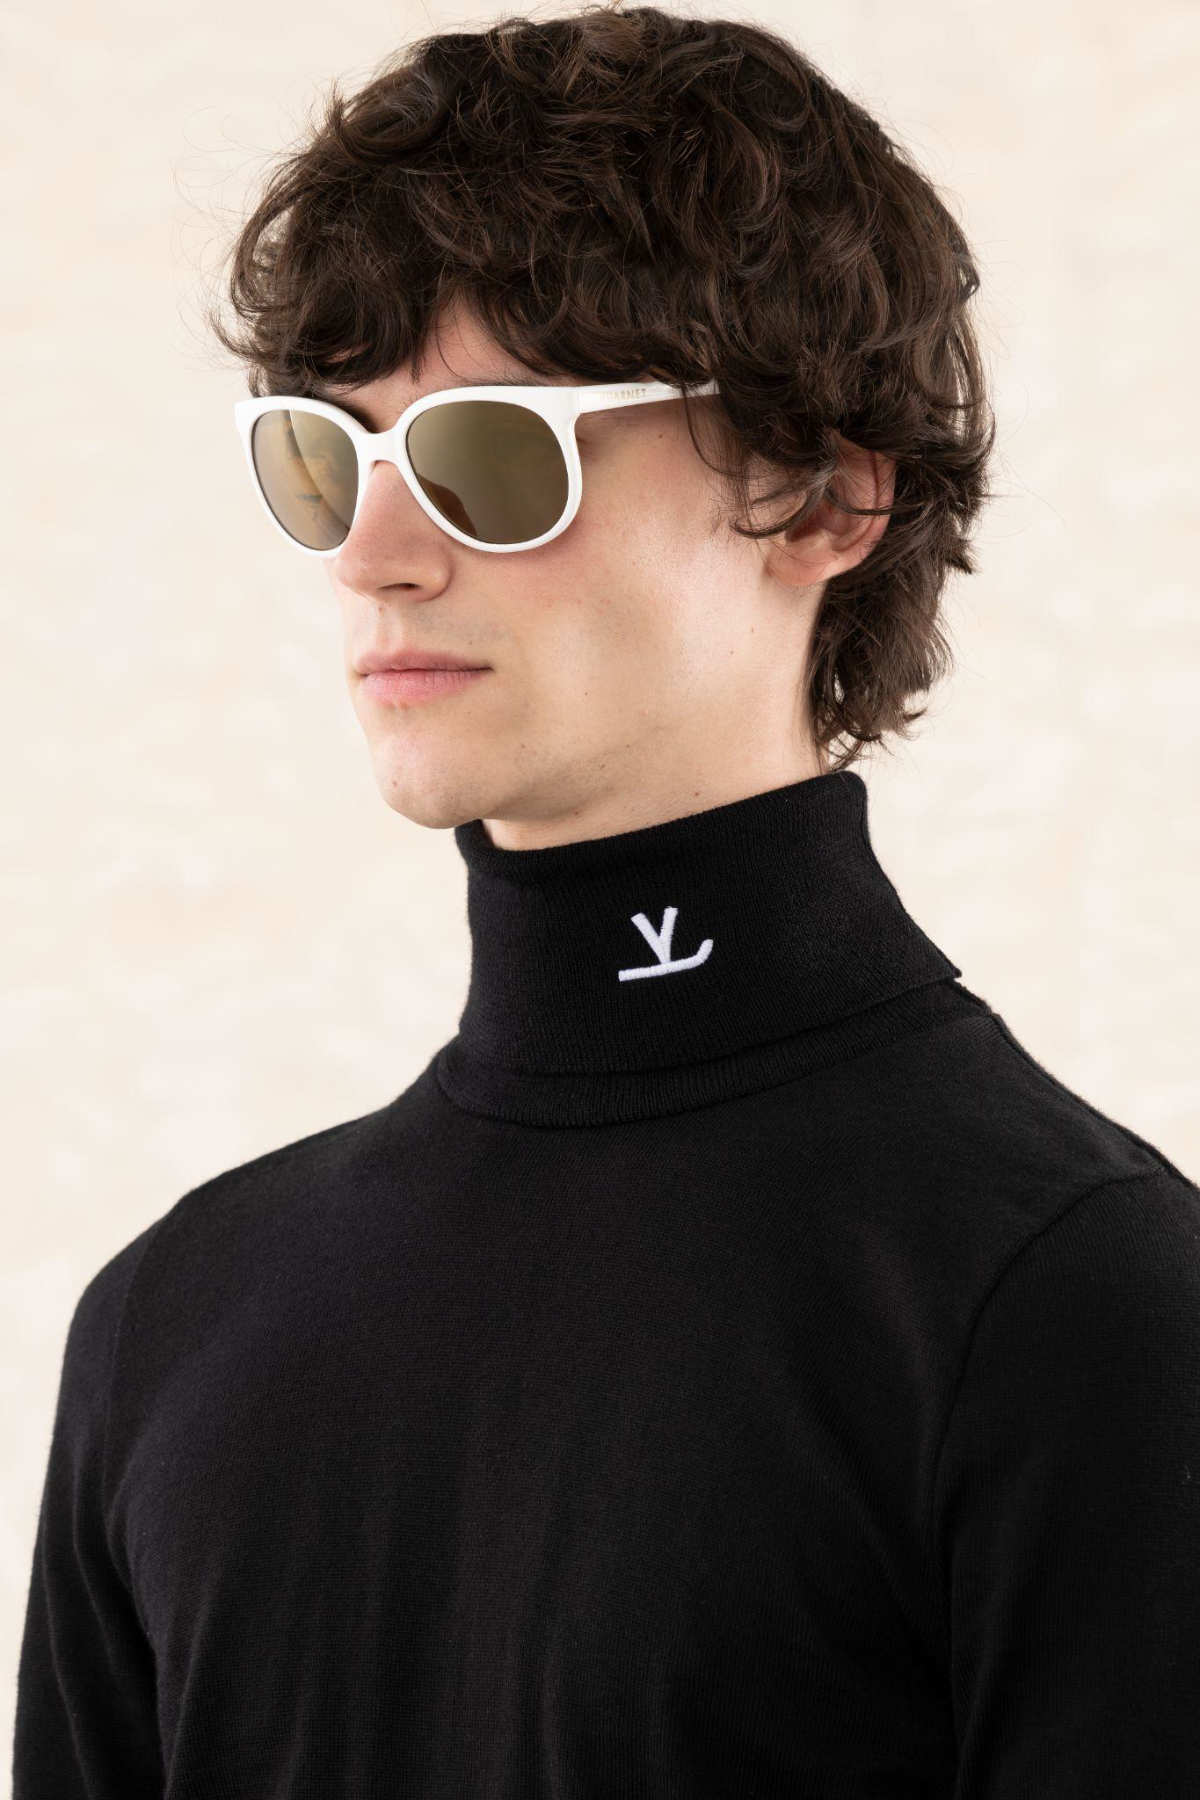 Vuarnet Launches New Sunglasses For The Paris 2024 Olympic And Paralympic Games